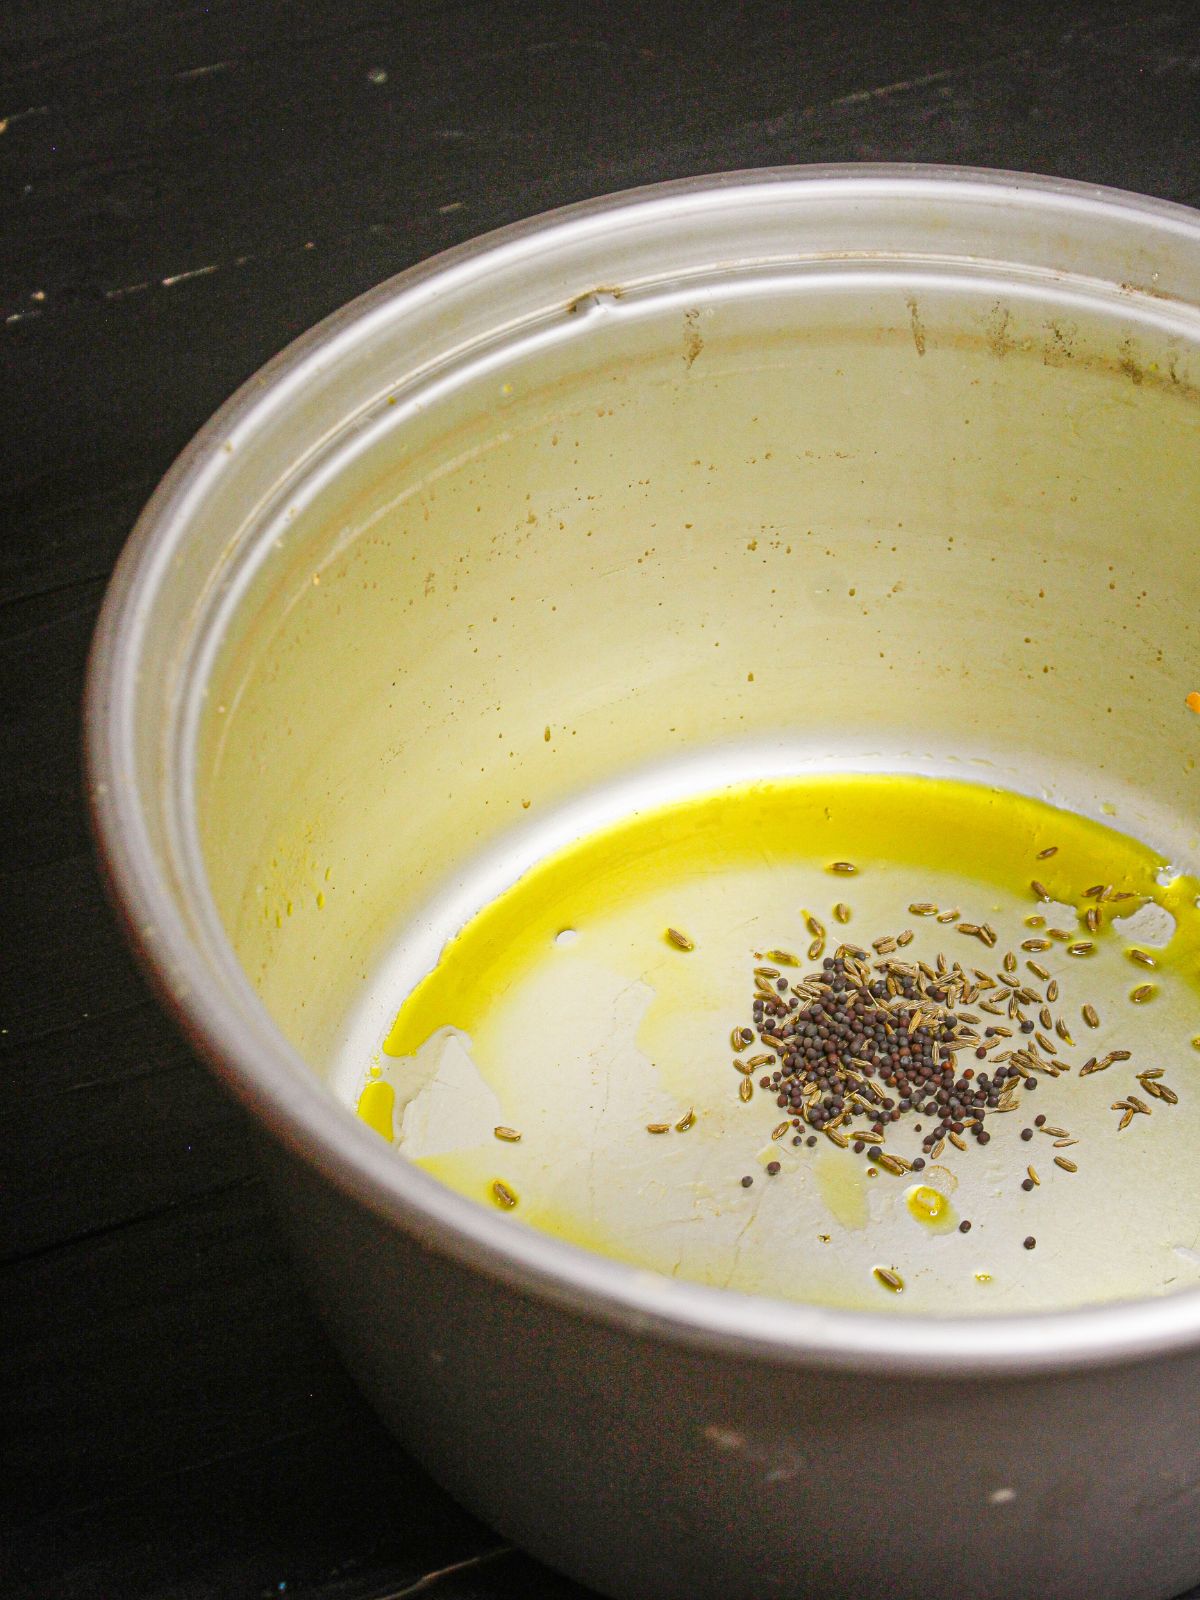 Add some mustard seeds to the pot